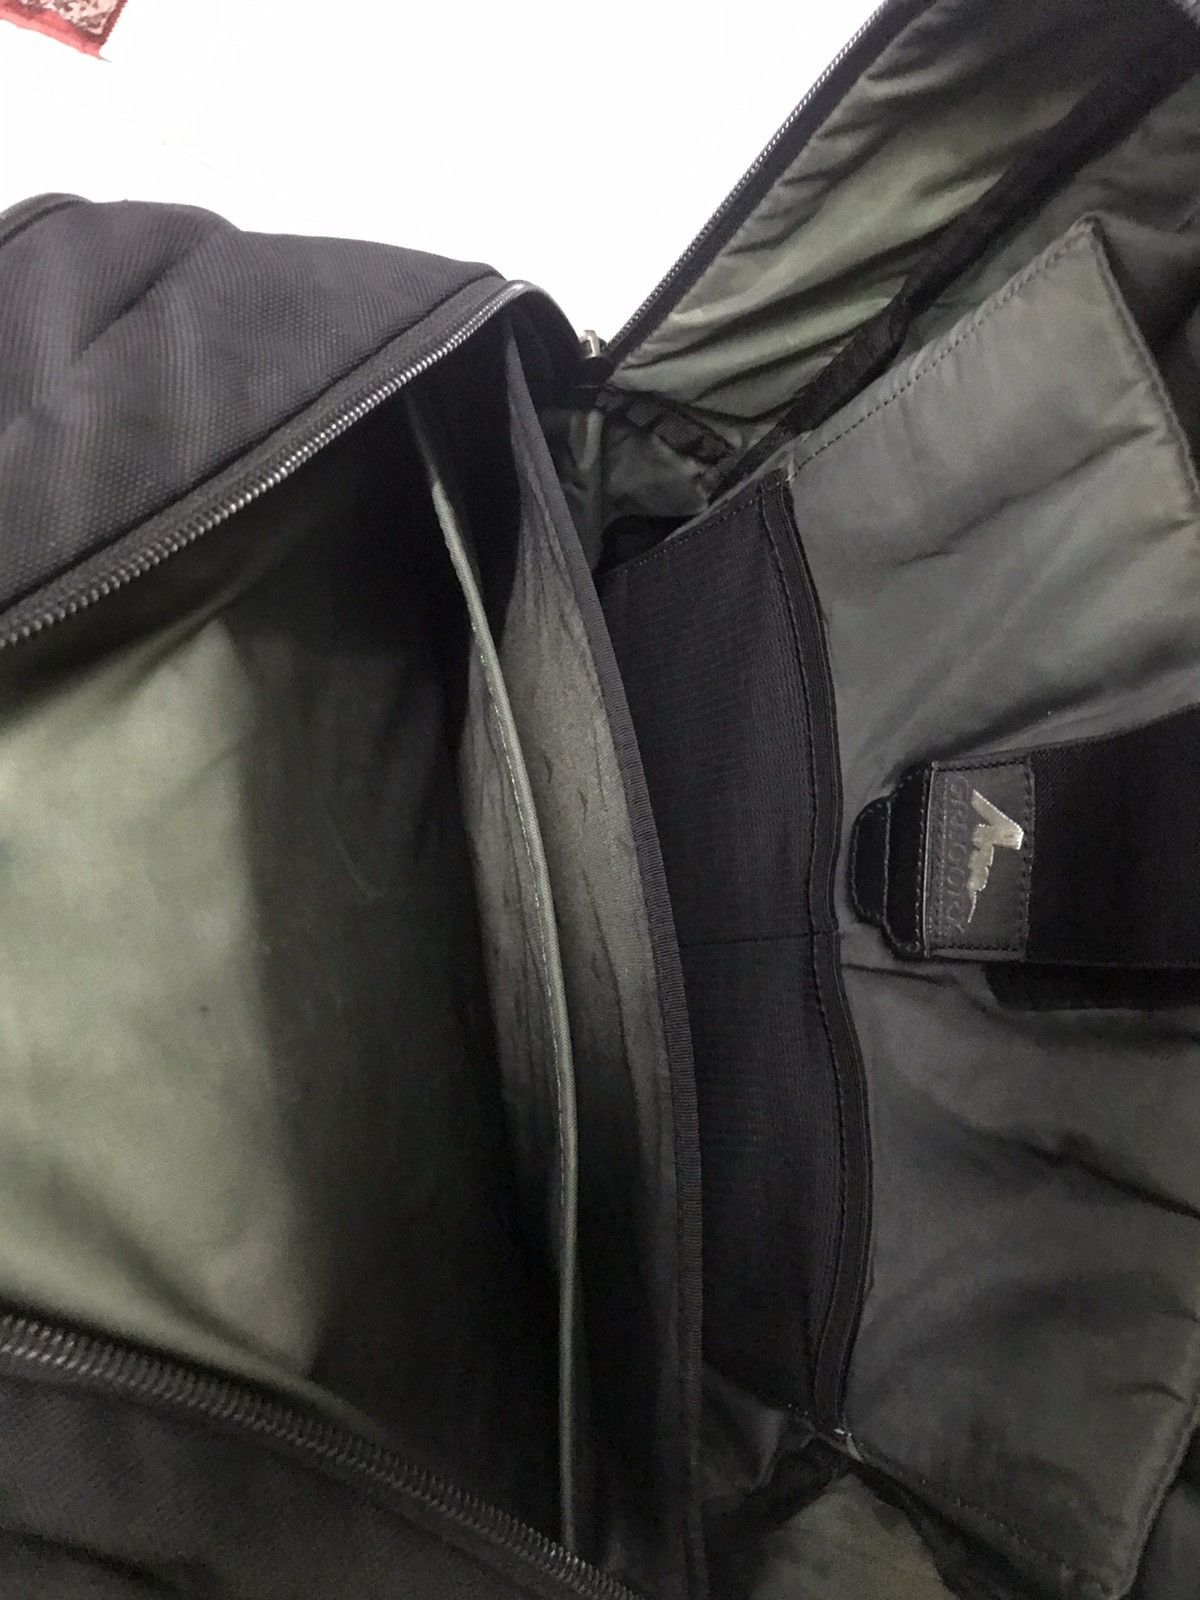 Authentic Gregory Laptop Size Backpack - 18